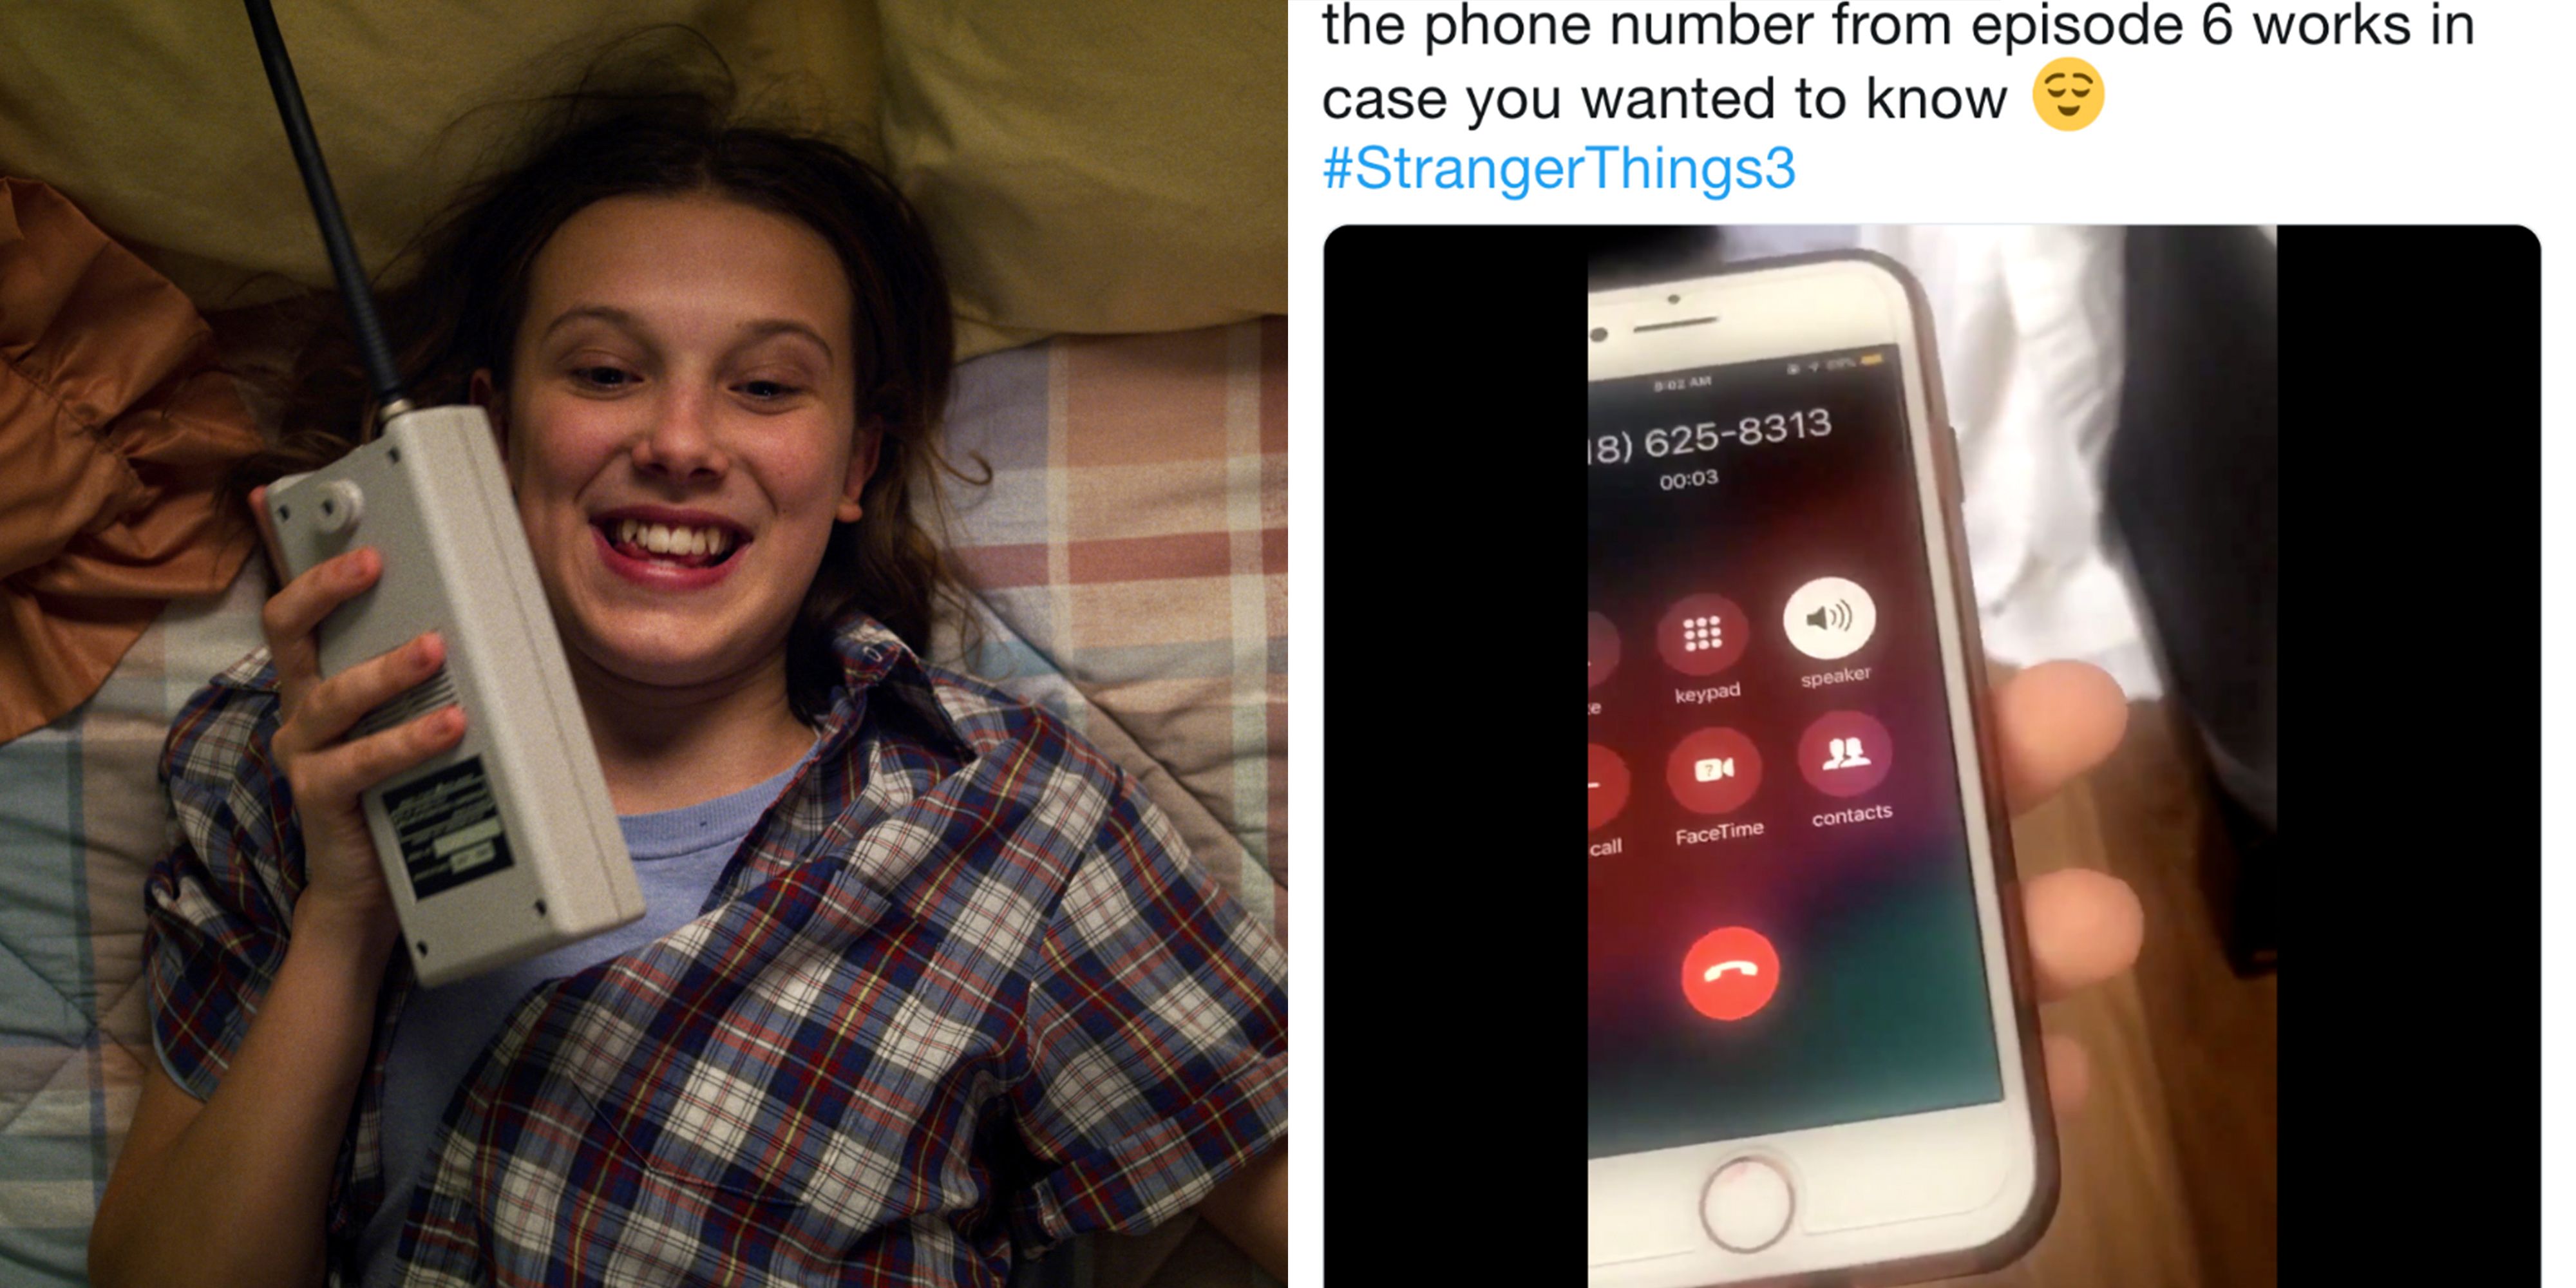 There's a Stranger Things 3 Easter Egg & It's a Real Phone Number